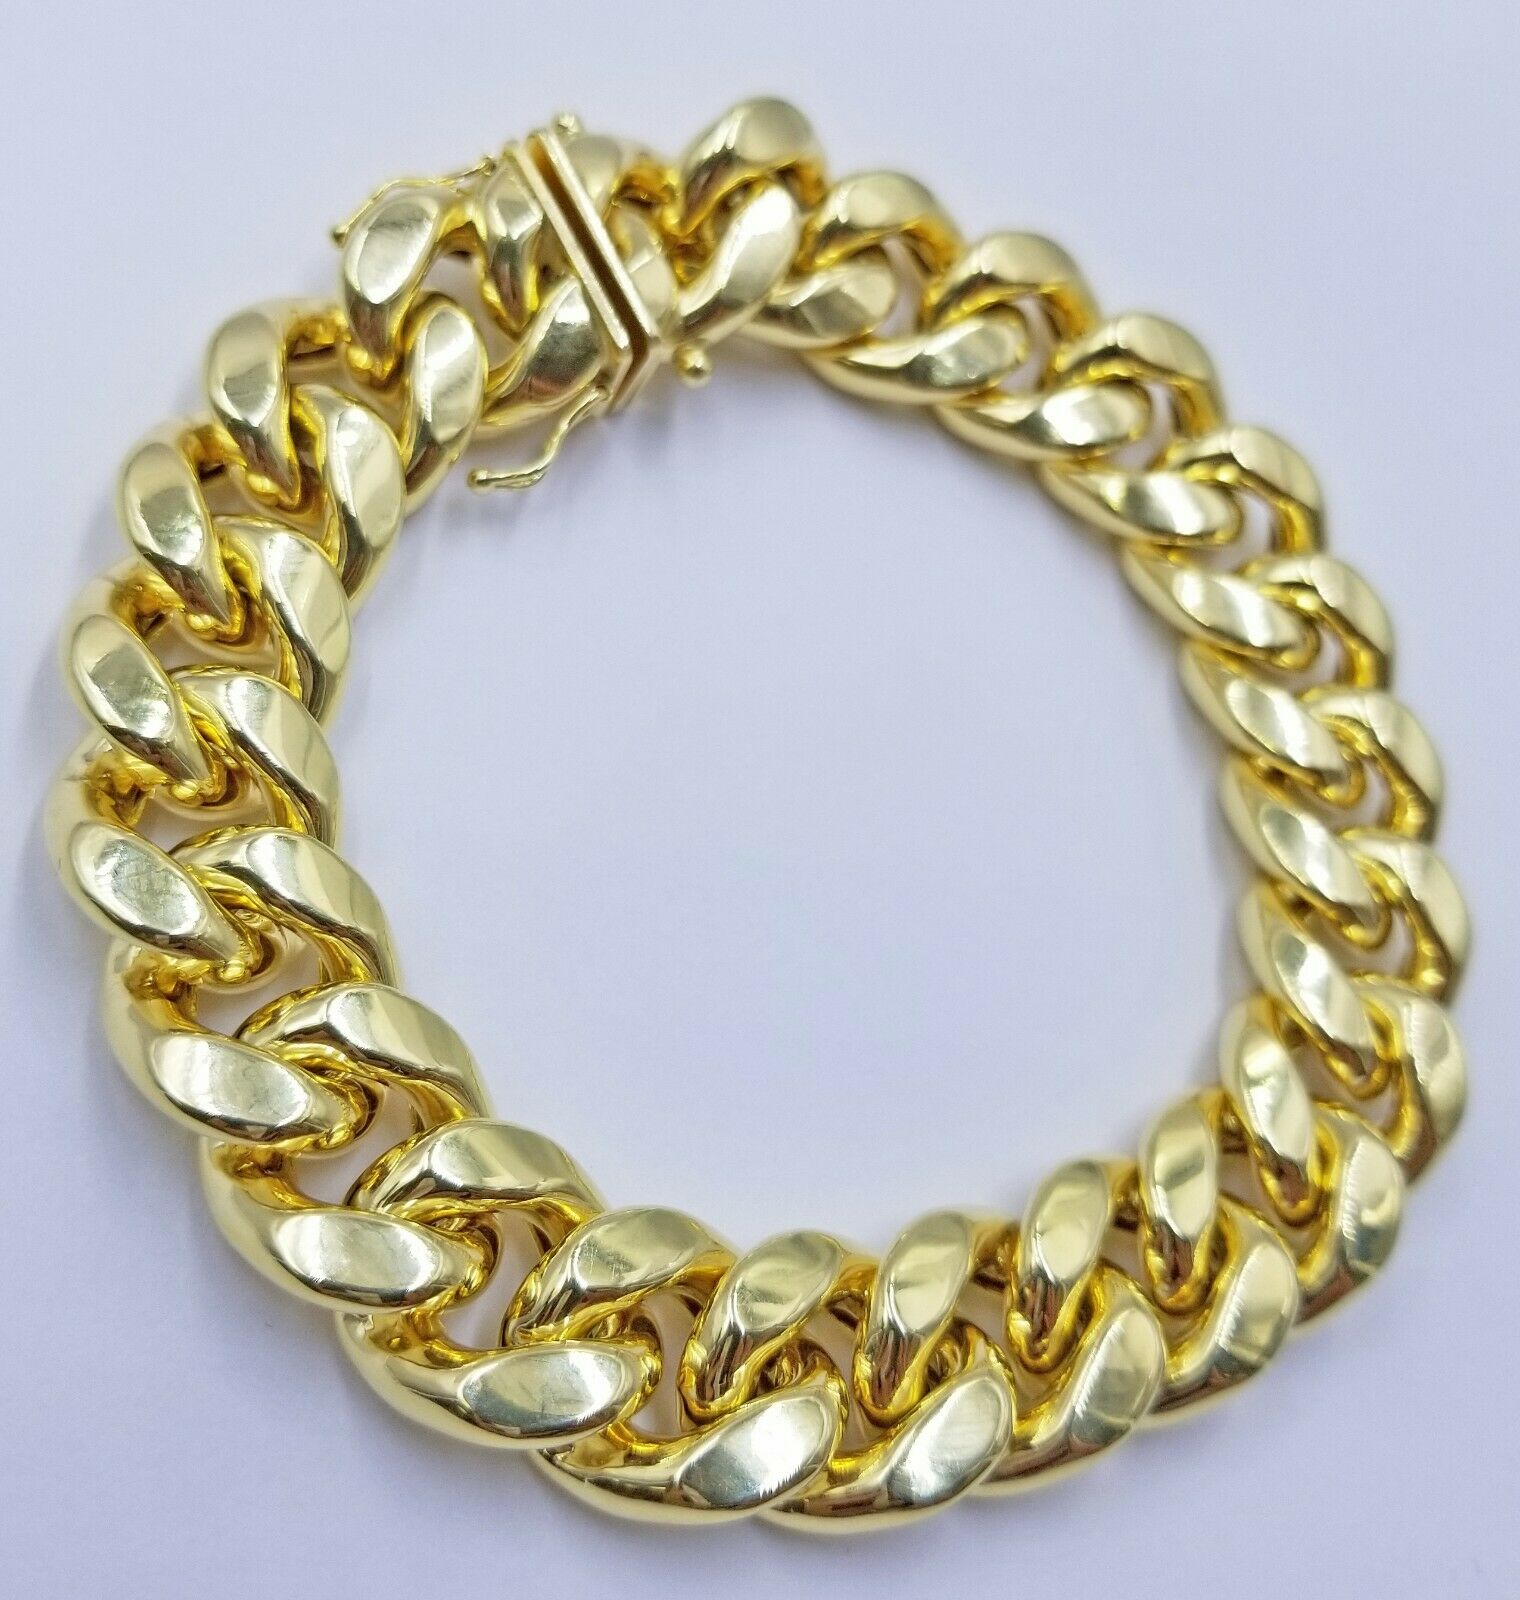 Real 10k Gold Mens Bracelet Miami Cuban Link 9" 15mm Box clasp Thick Strong 10kt